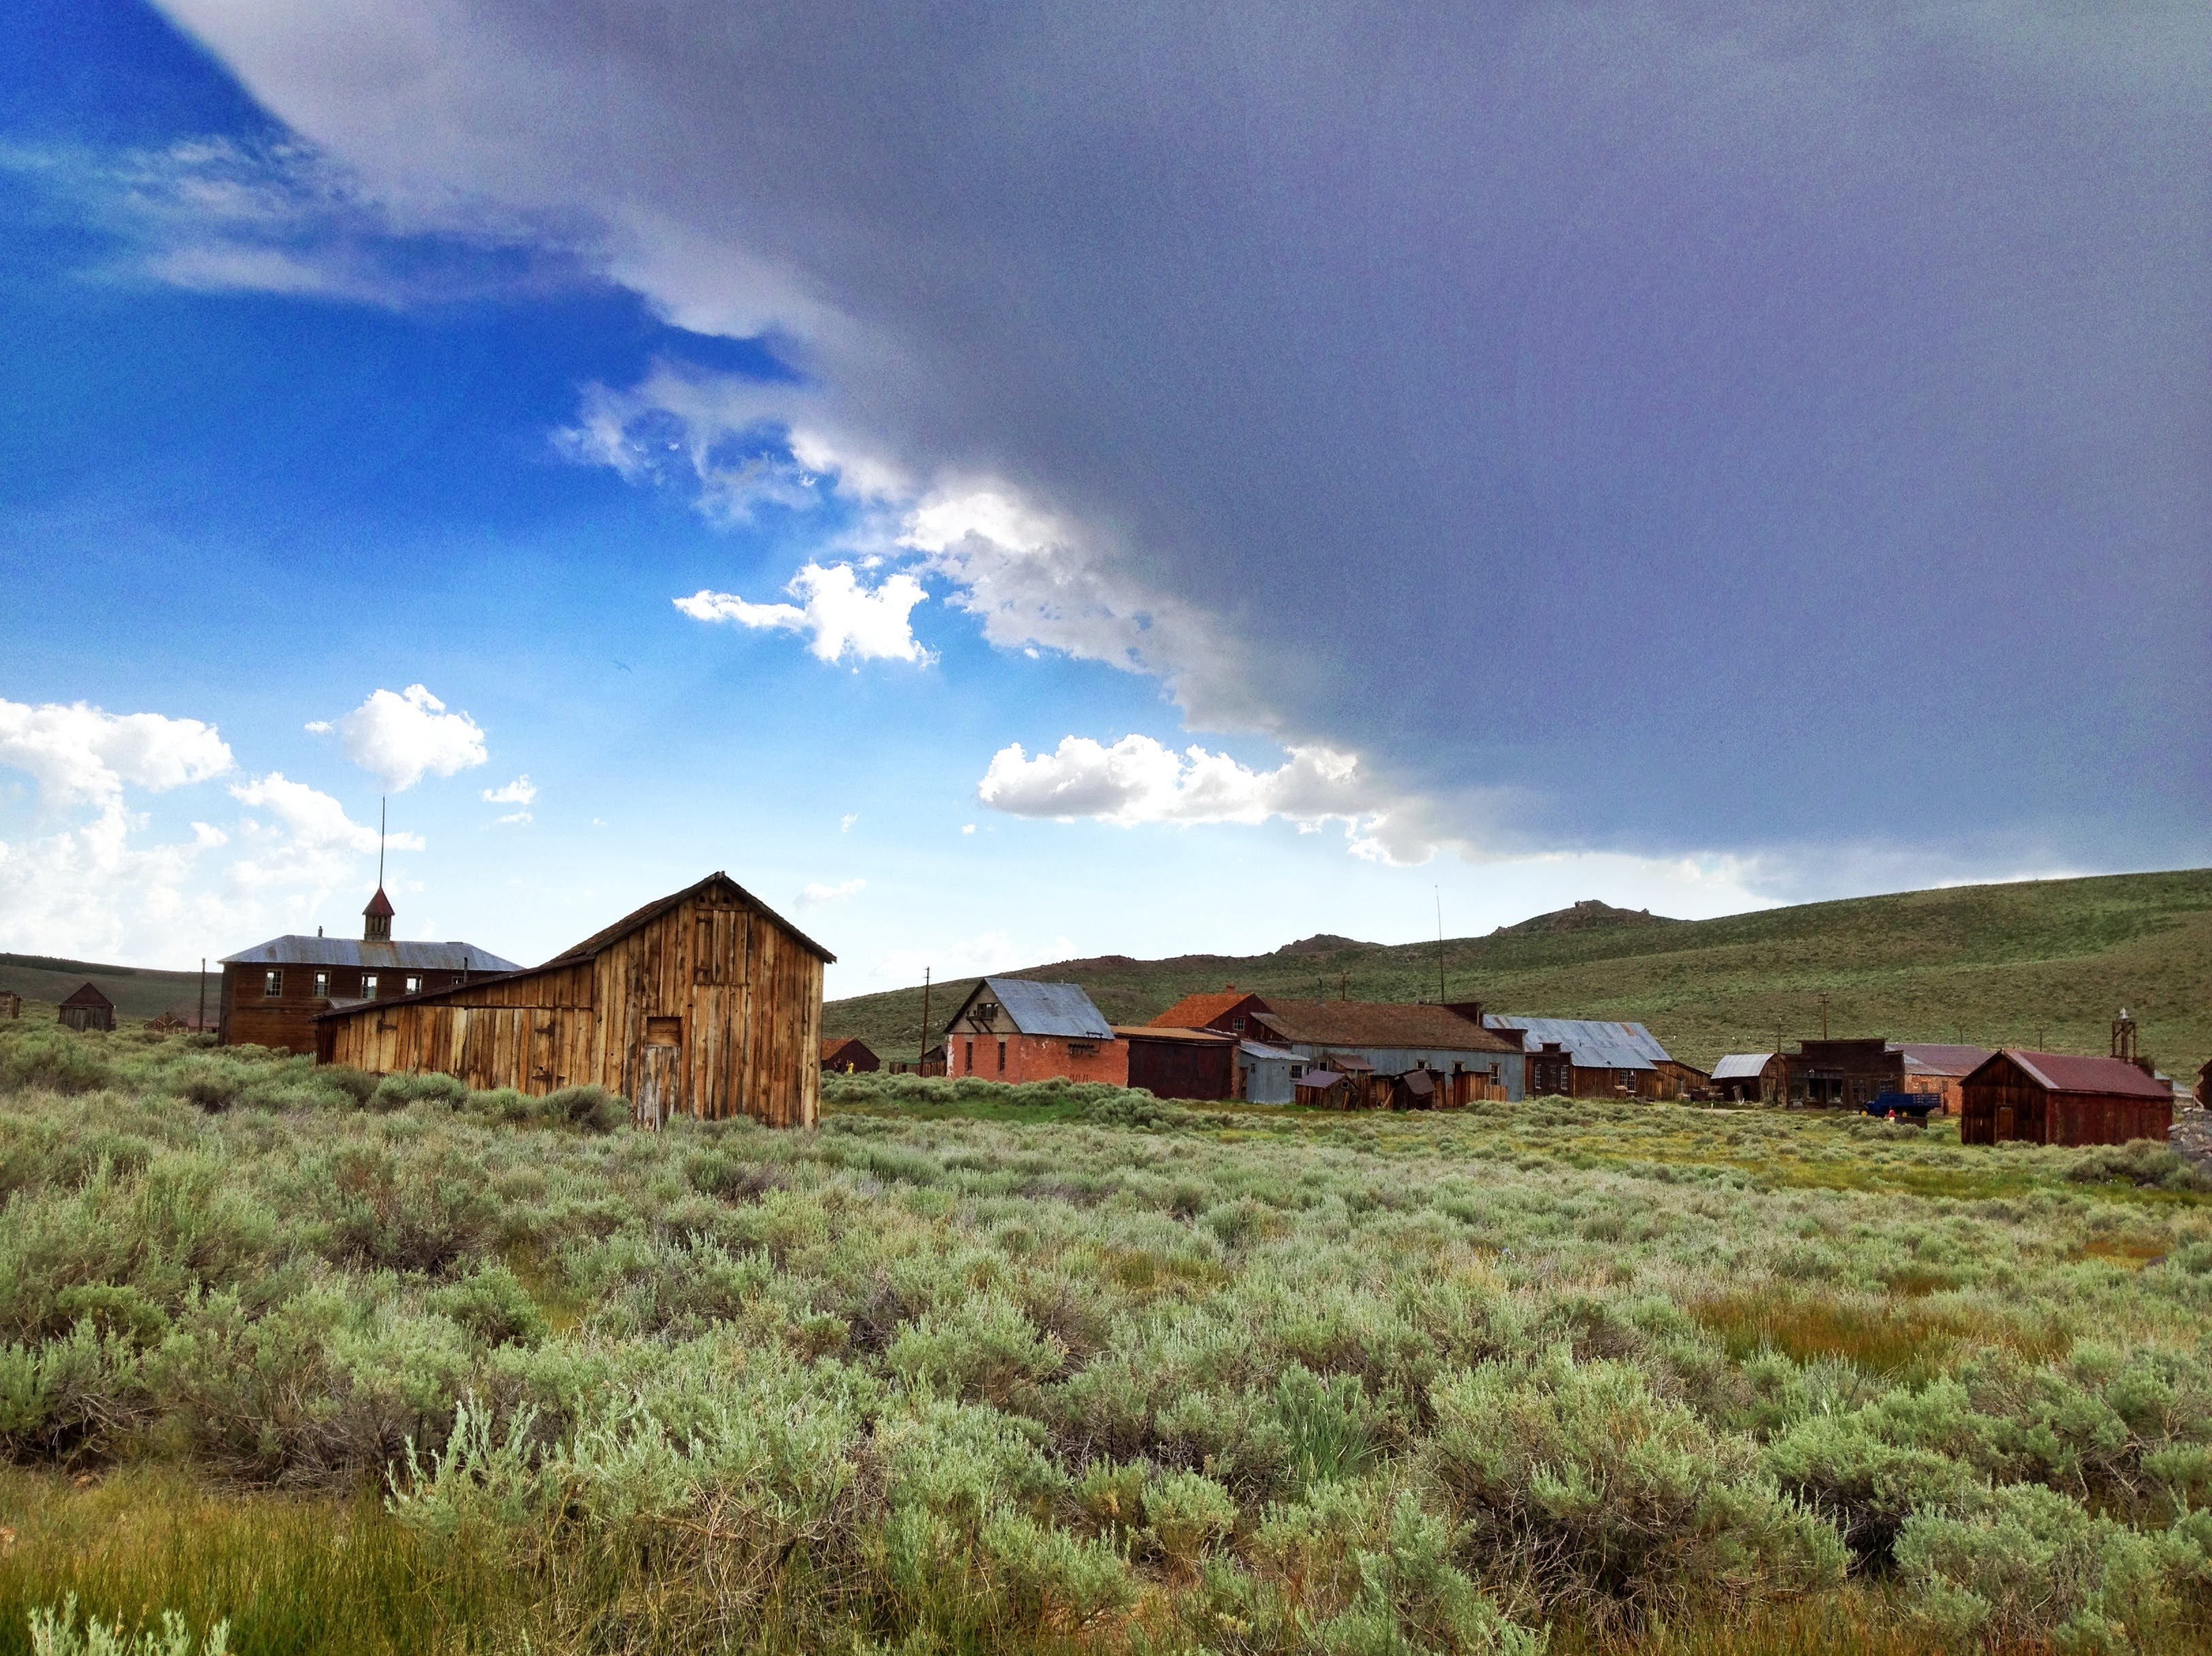 Bodie under an impending storm clouds